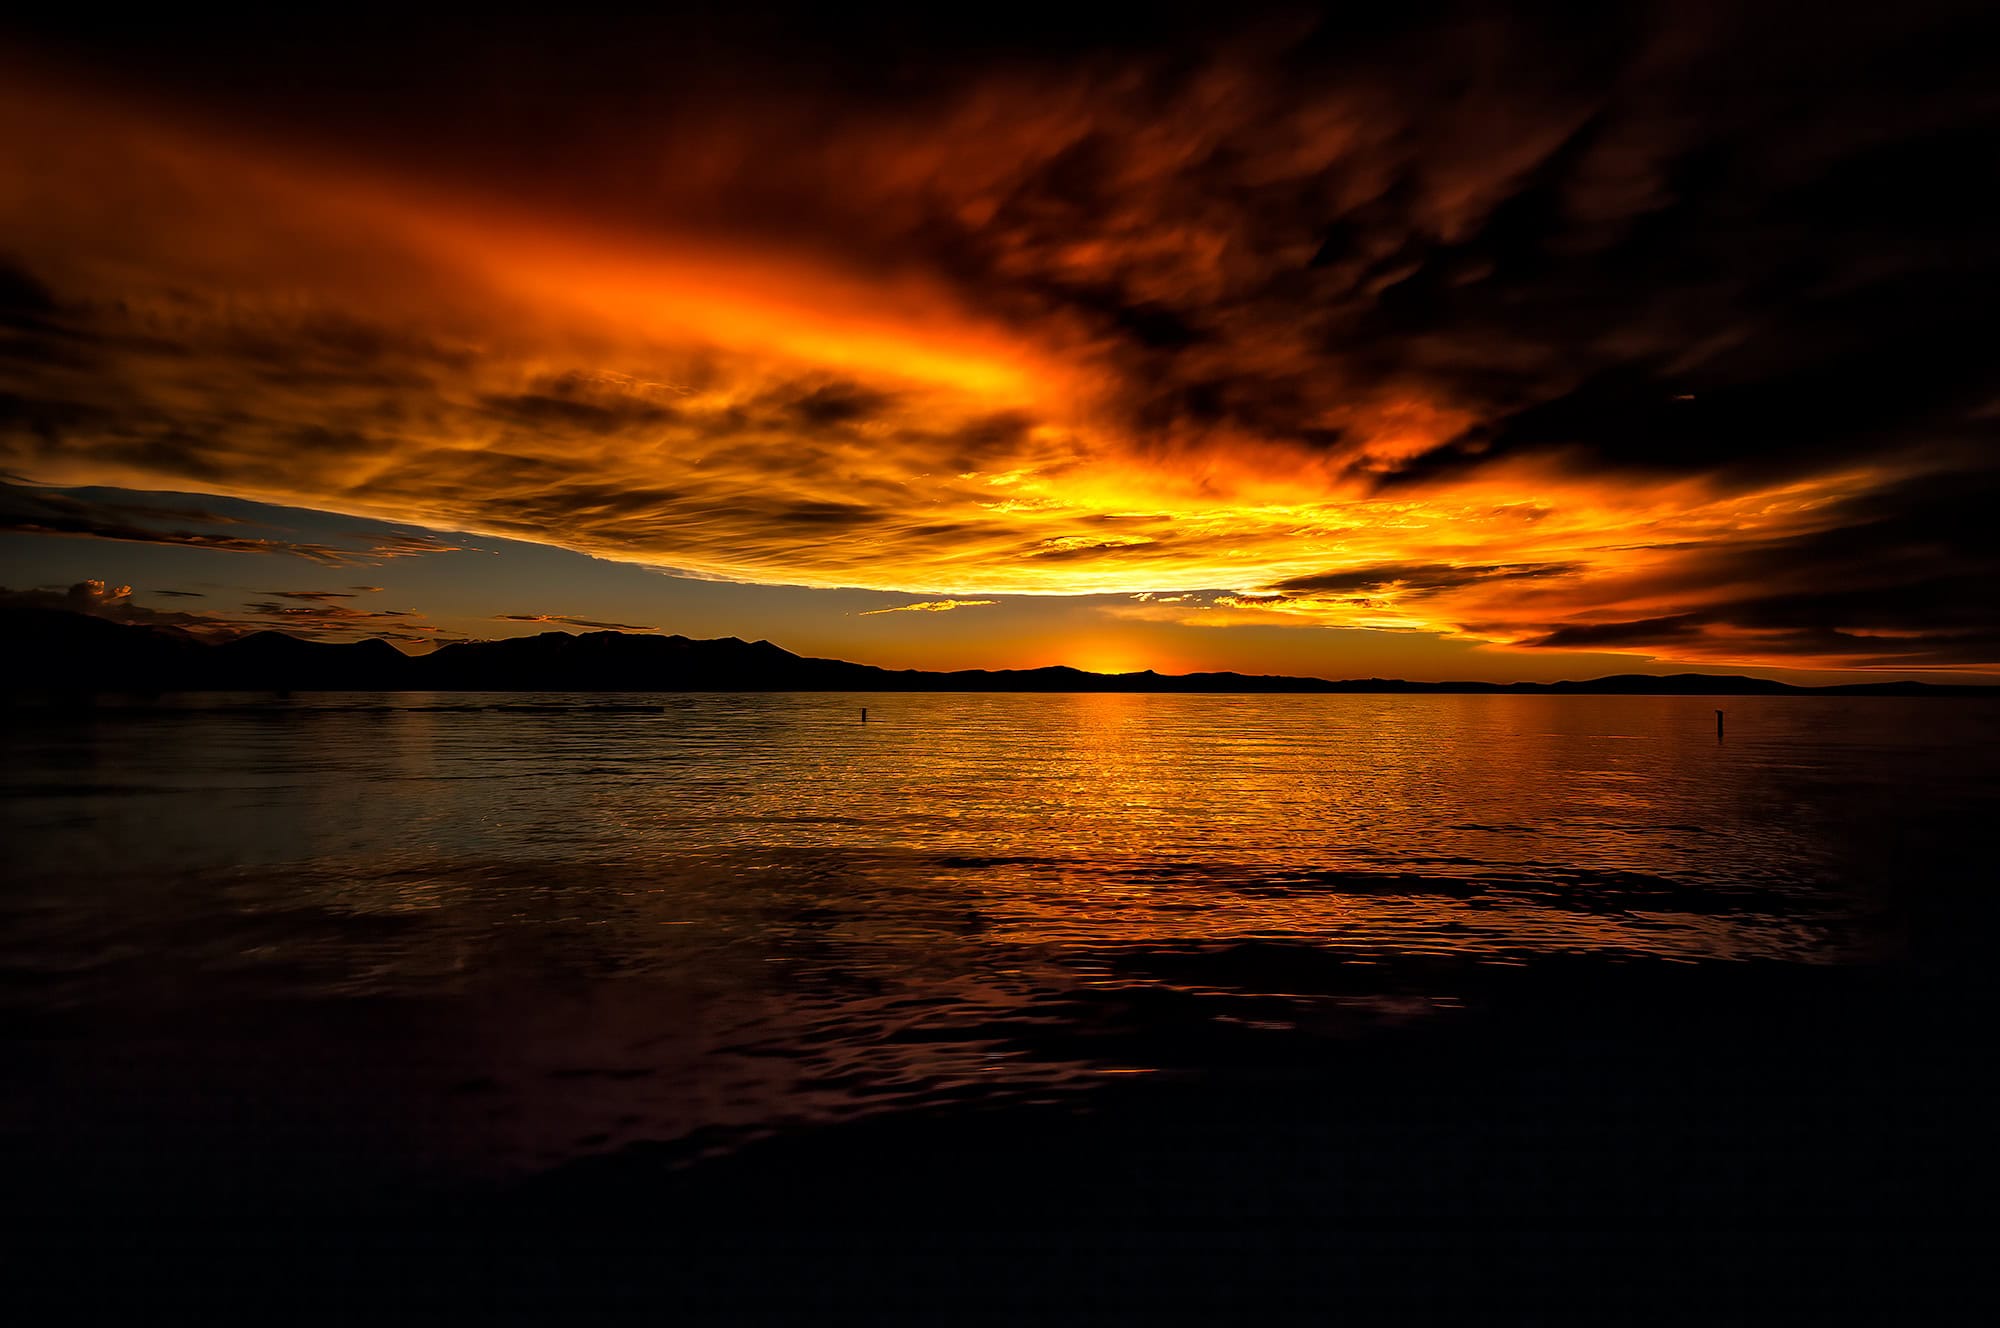 A spectacular sunset looking across Lake Tahoe